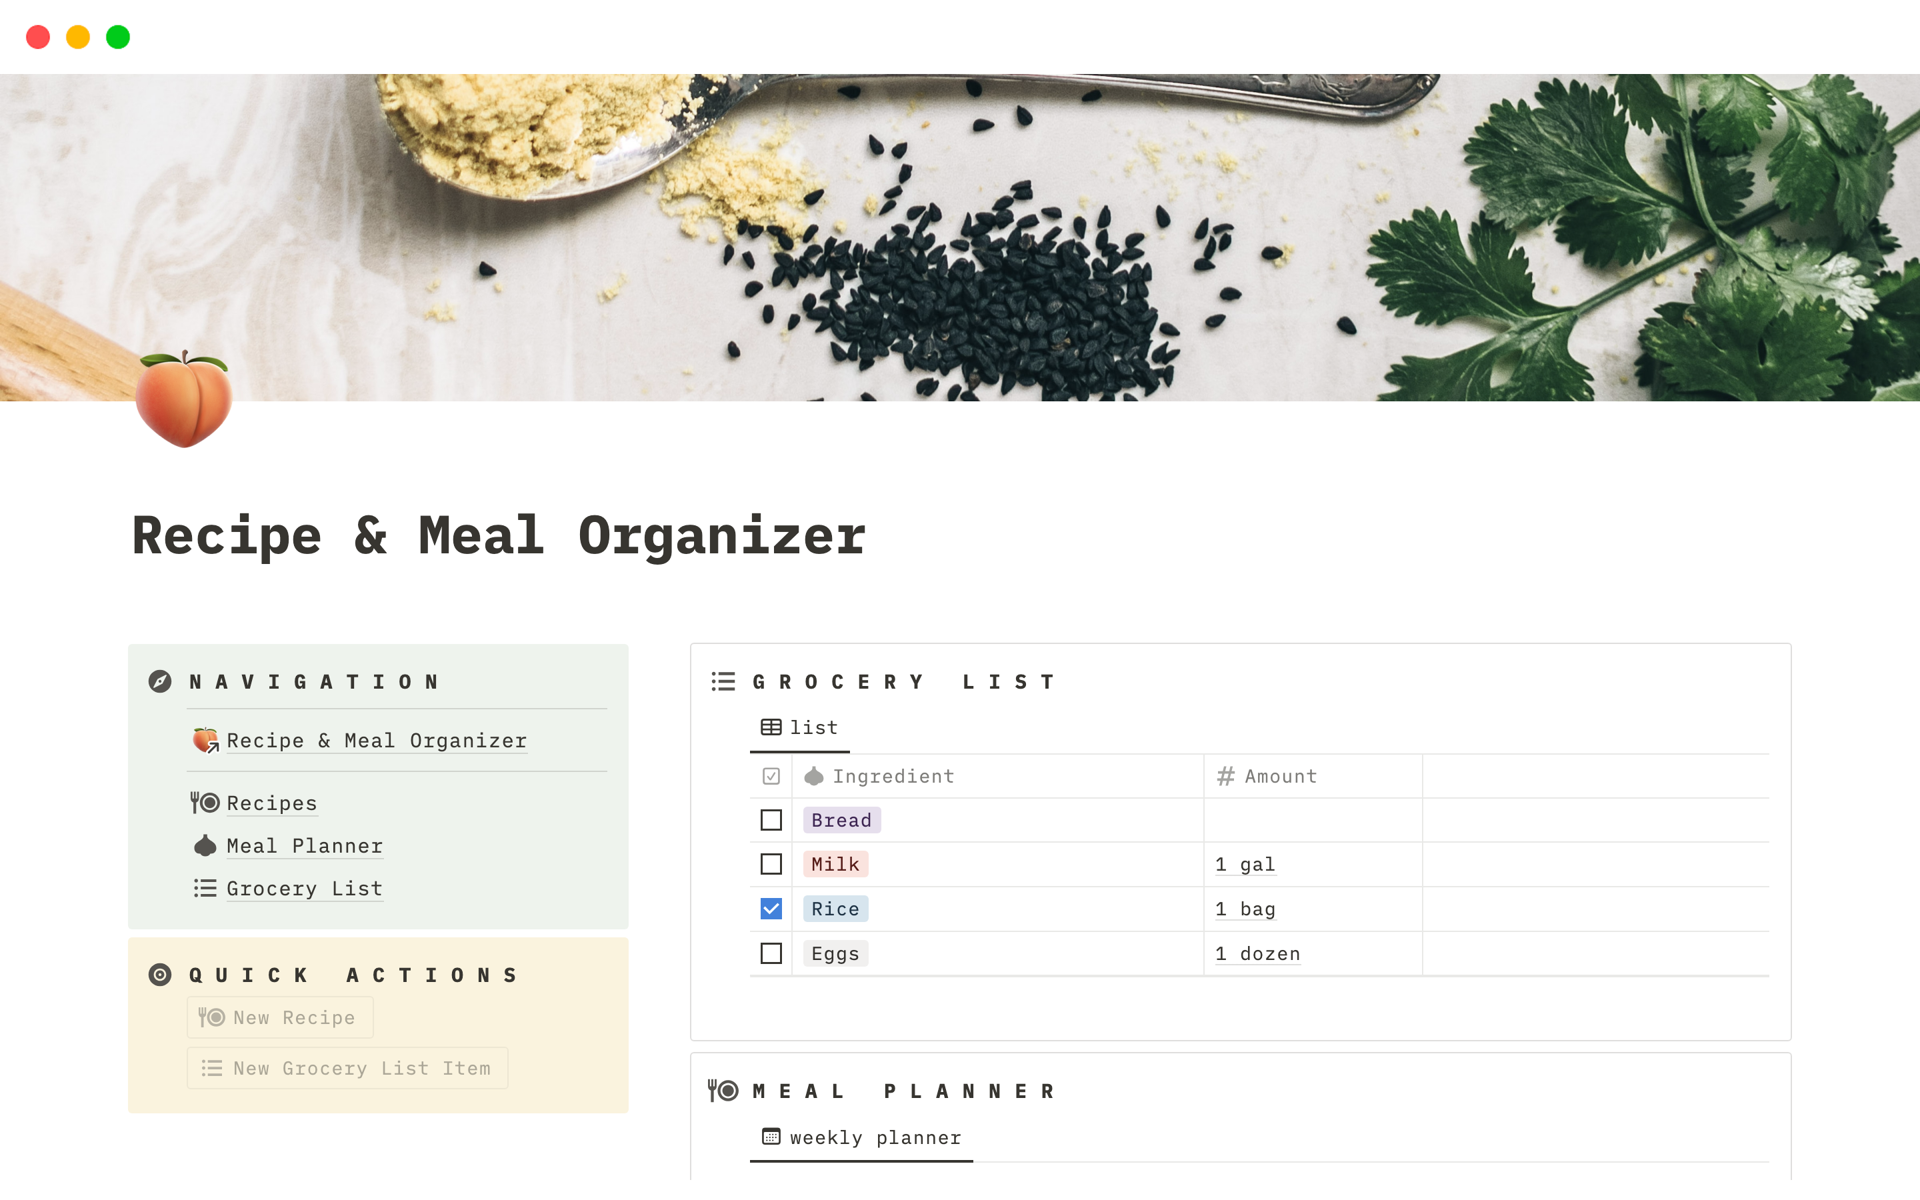 This template is built to keep your recipes, meal plans, grocery lists organized.